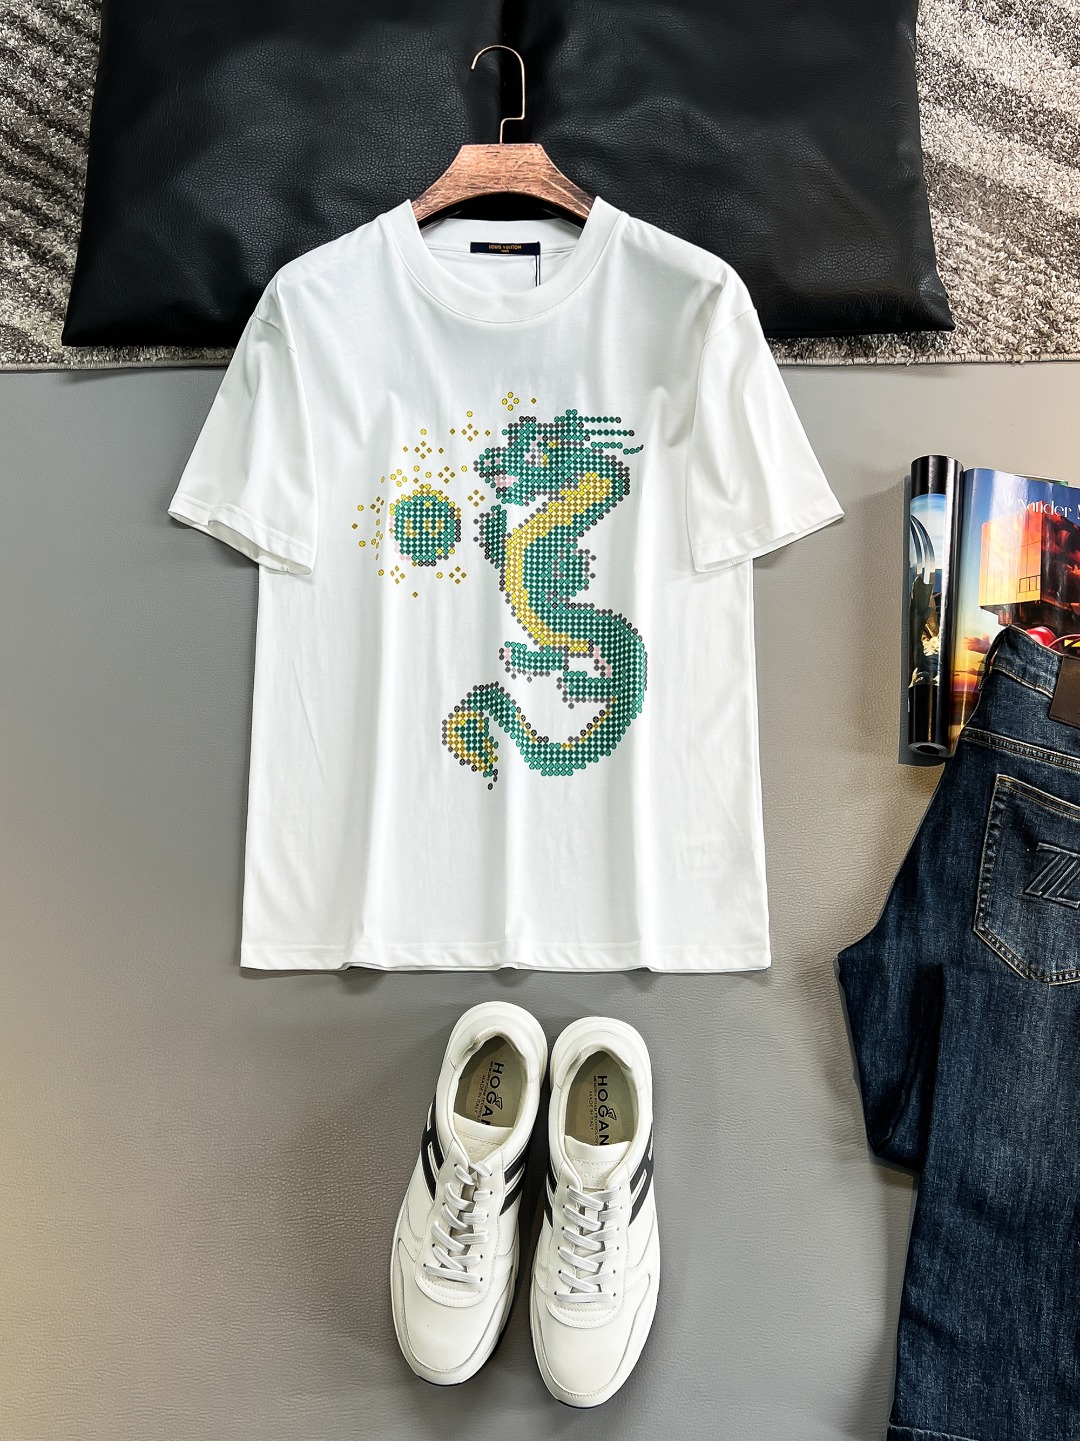 Louis Vuitton mirror quality
 Clothing T-Shirt Black White Spring/Summer Collection Fashion Short Sleeve